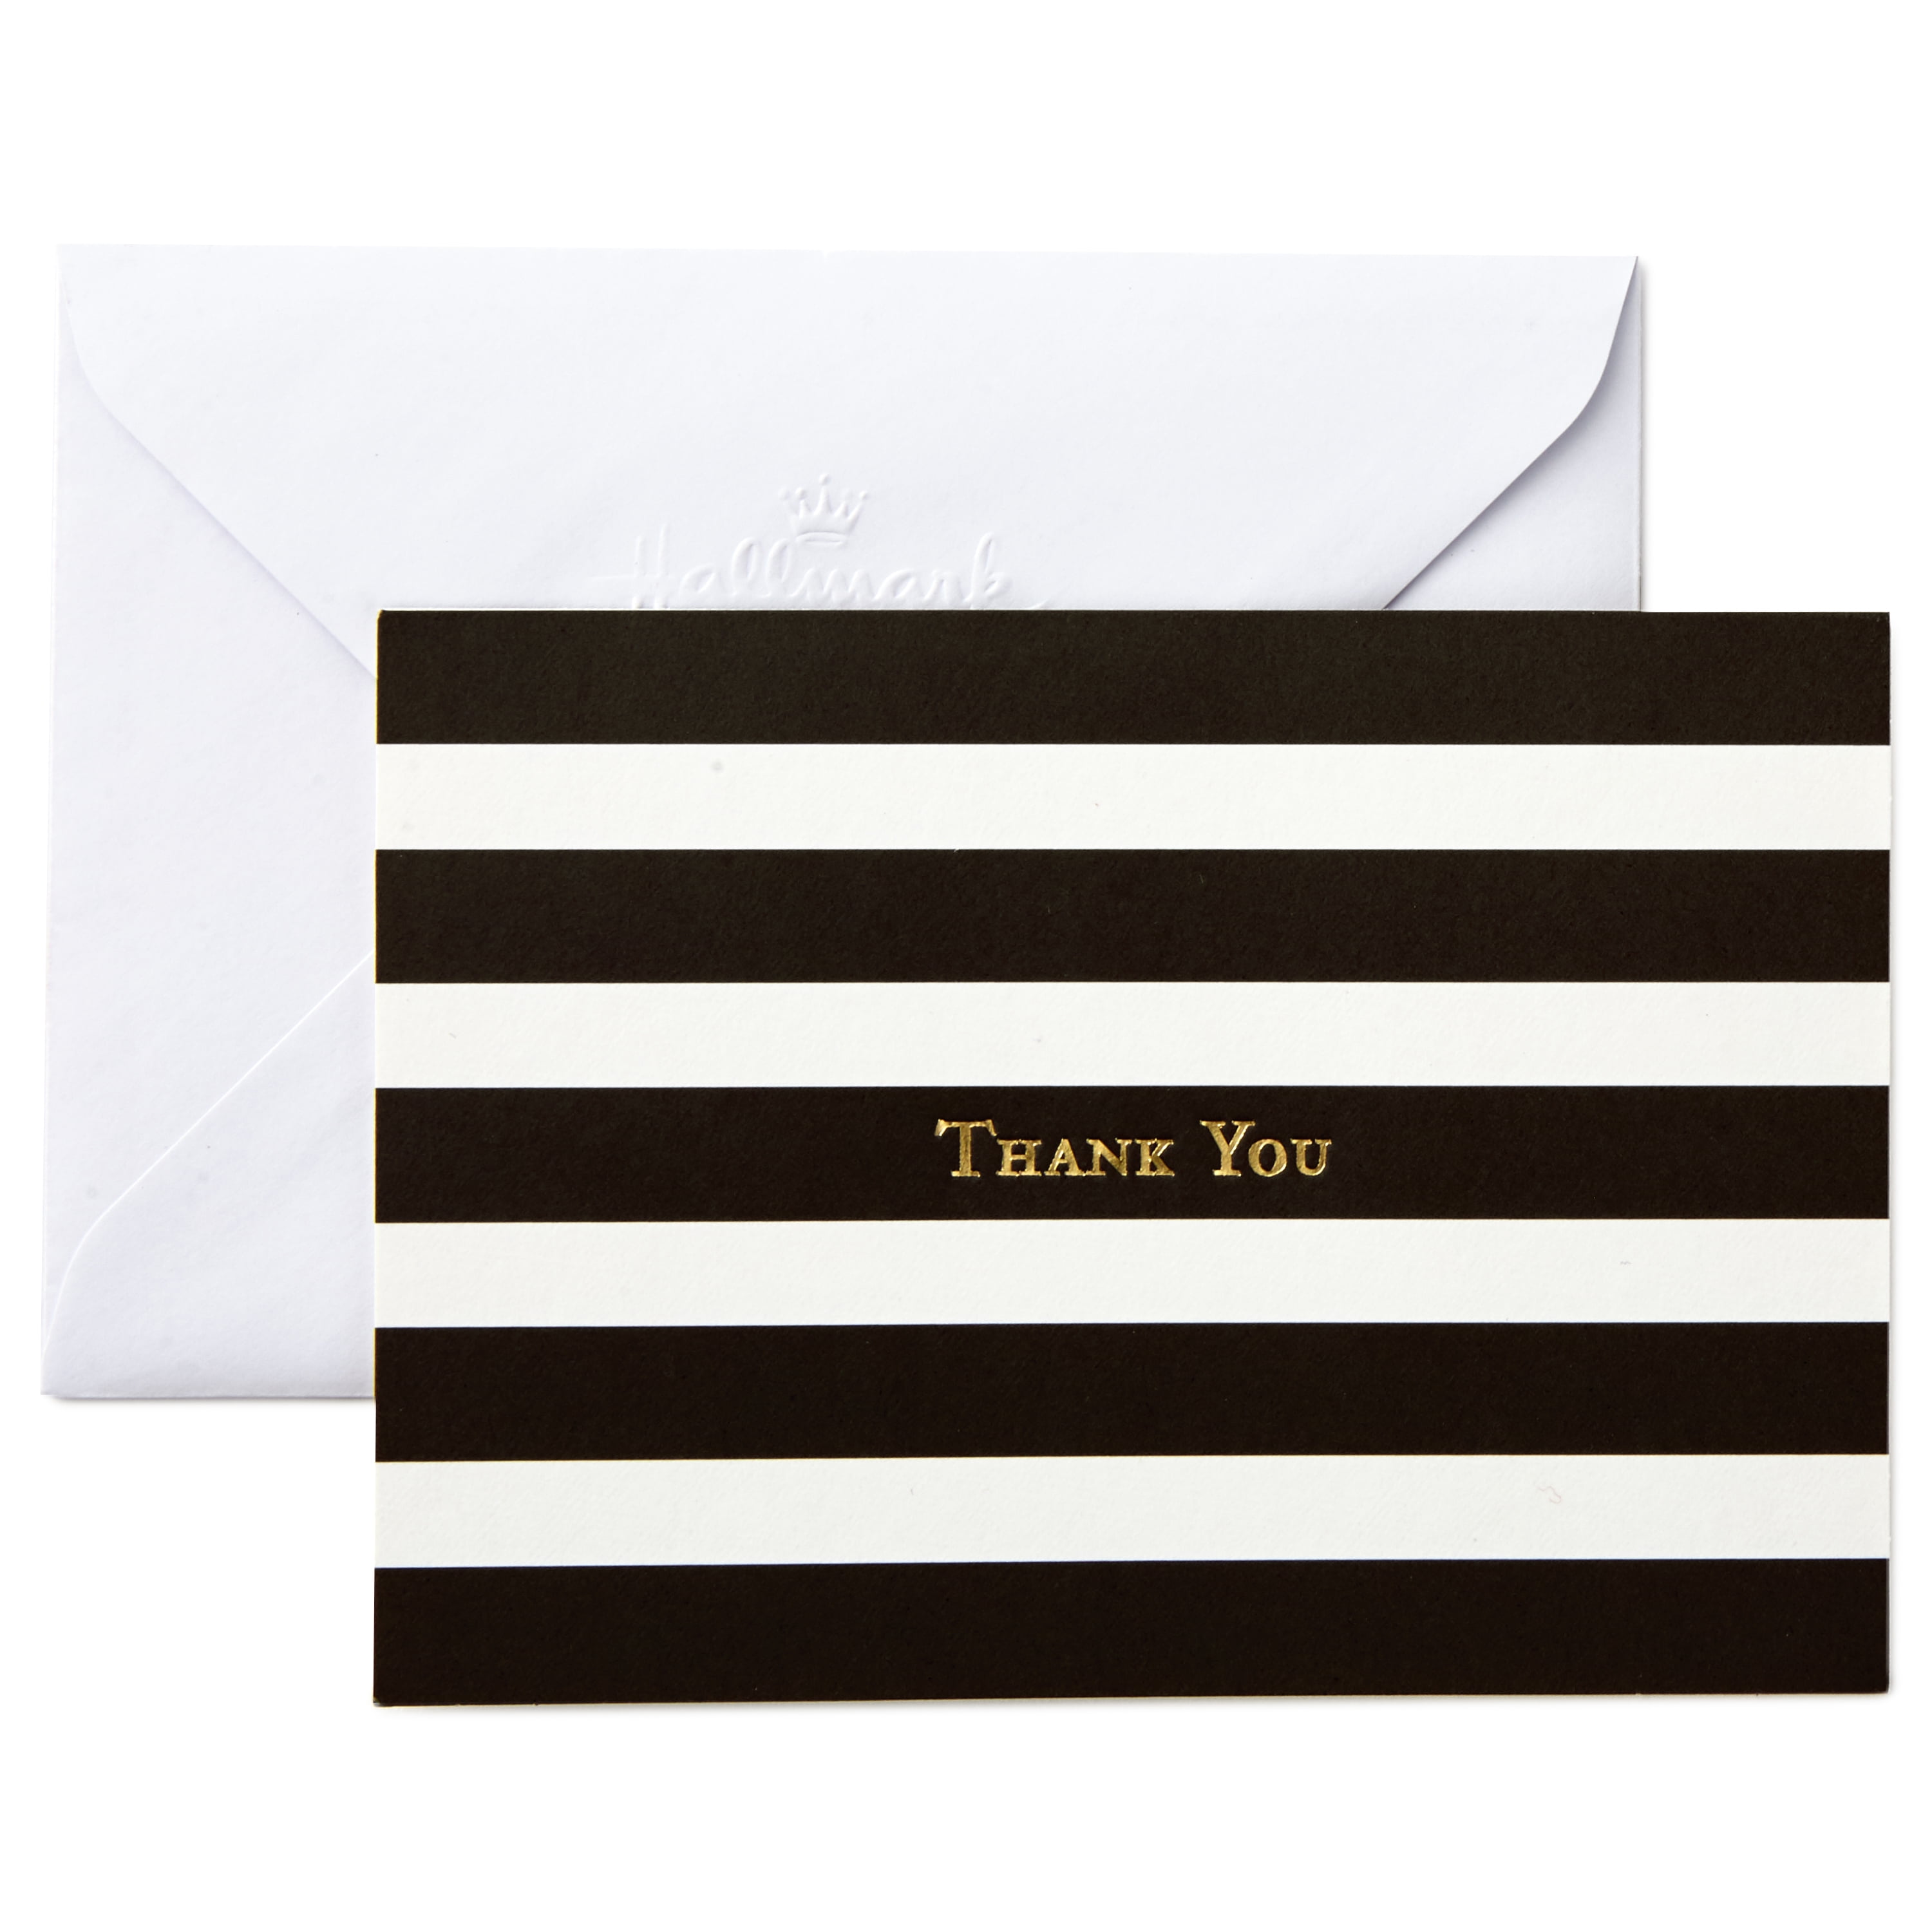 5CZE1865 10 Cards with Envelopes Details about   Hallmark Thank You Cards Classic Plaid 